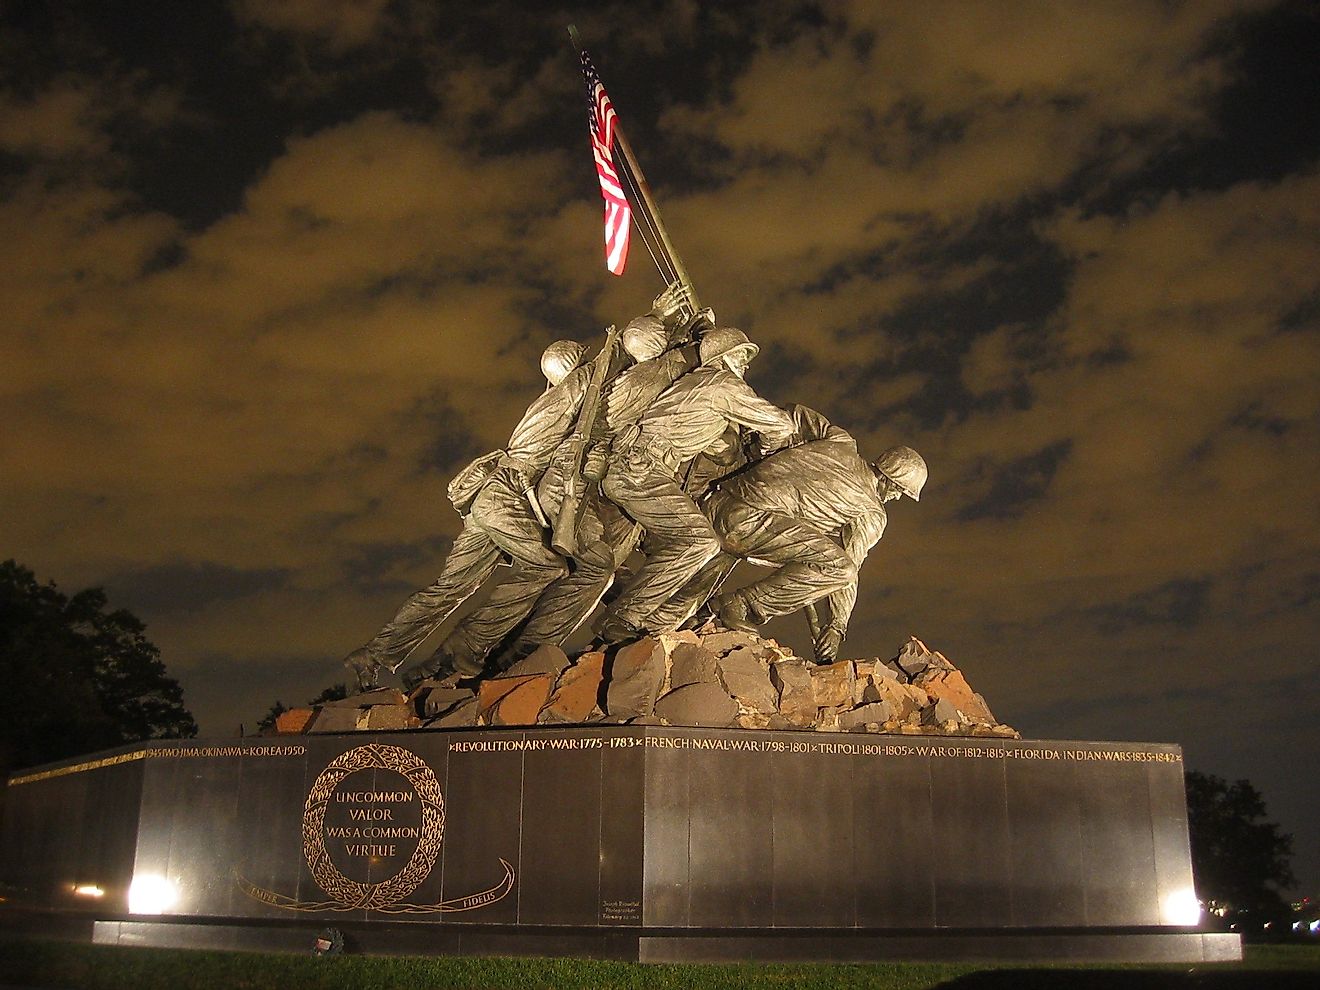 The United States Marine Corps War Memorial in Arlington, Virginia, United States.